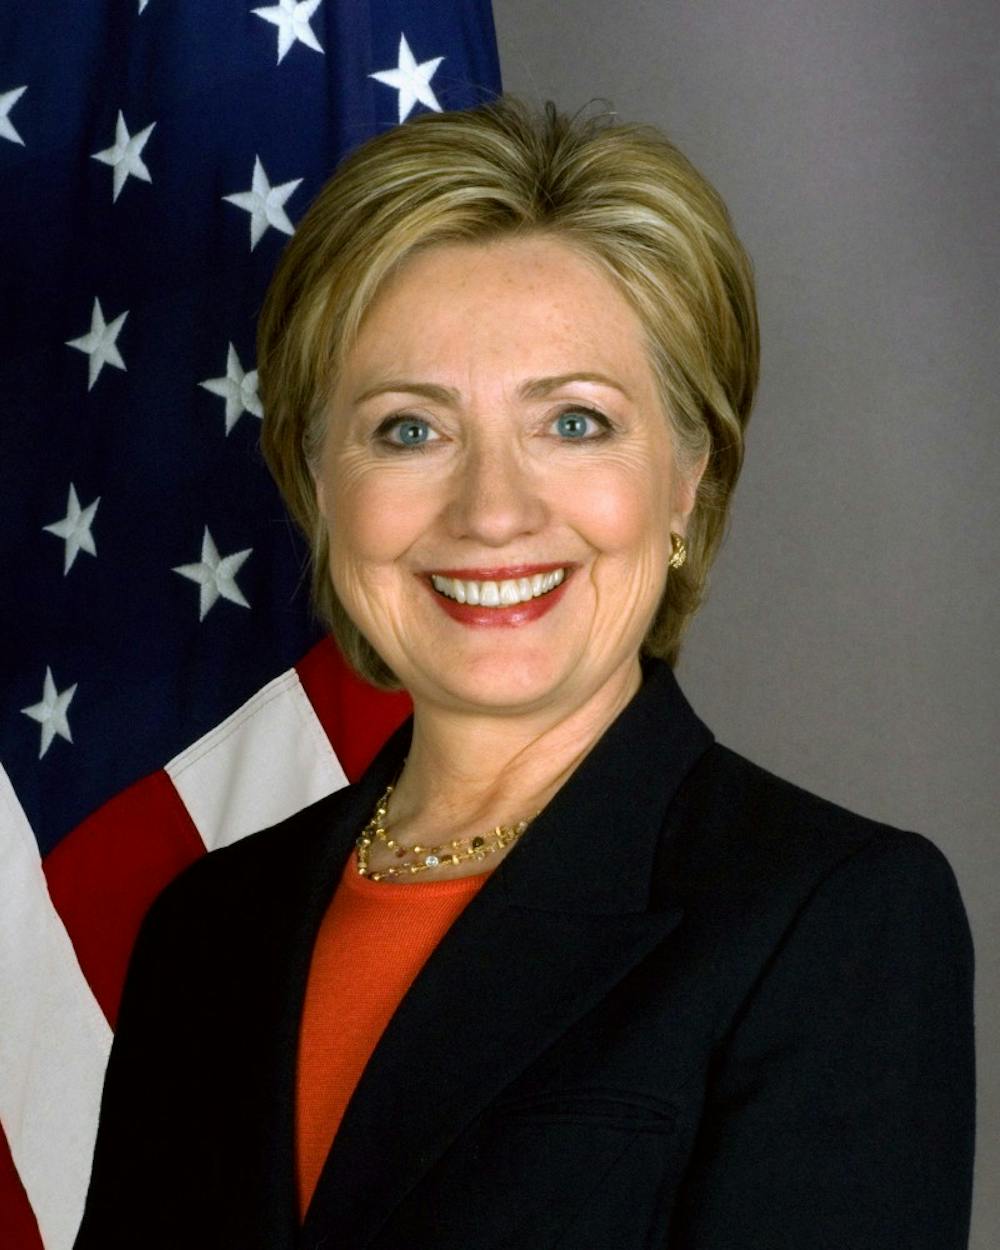 <p>FBI Director James B. Comey said the bureau will not be recommending criminal charges for Hillary Clinton in regards to emails sent on personal systems during her time as Secretary of State. <em>PHOTO COURTESY OF WIKIPEDIA.ORG</em></p>